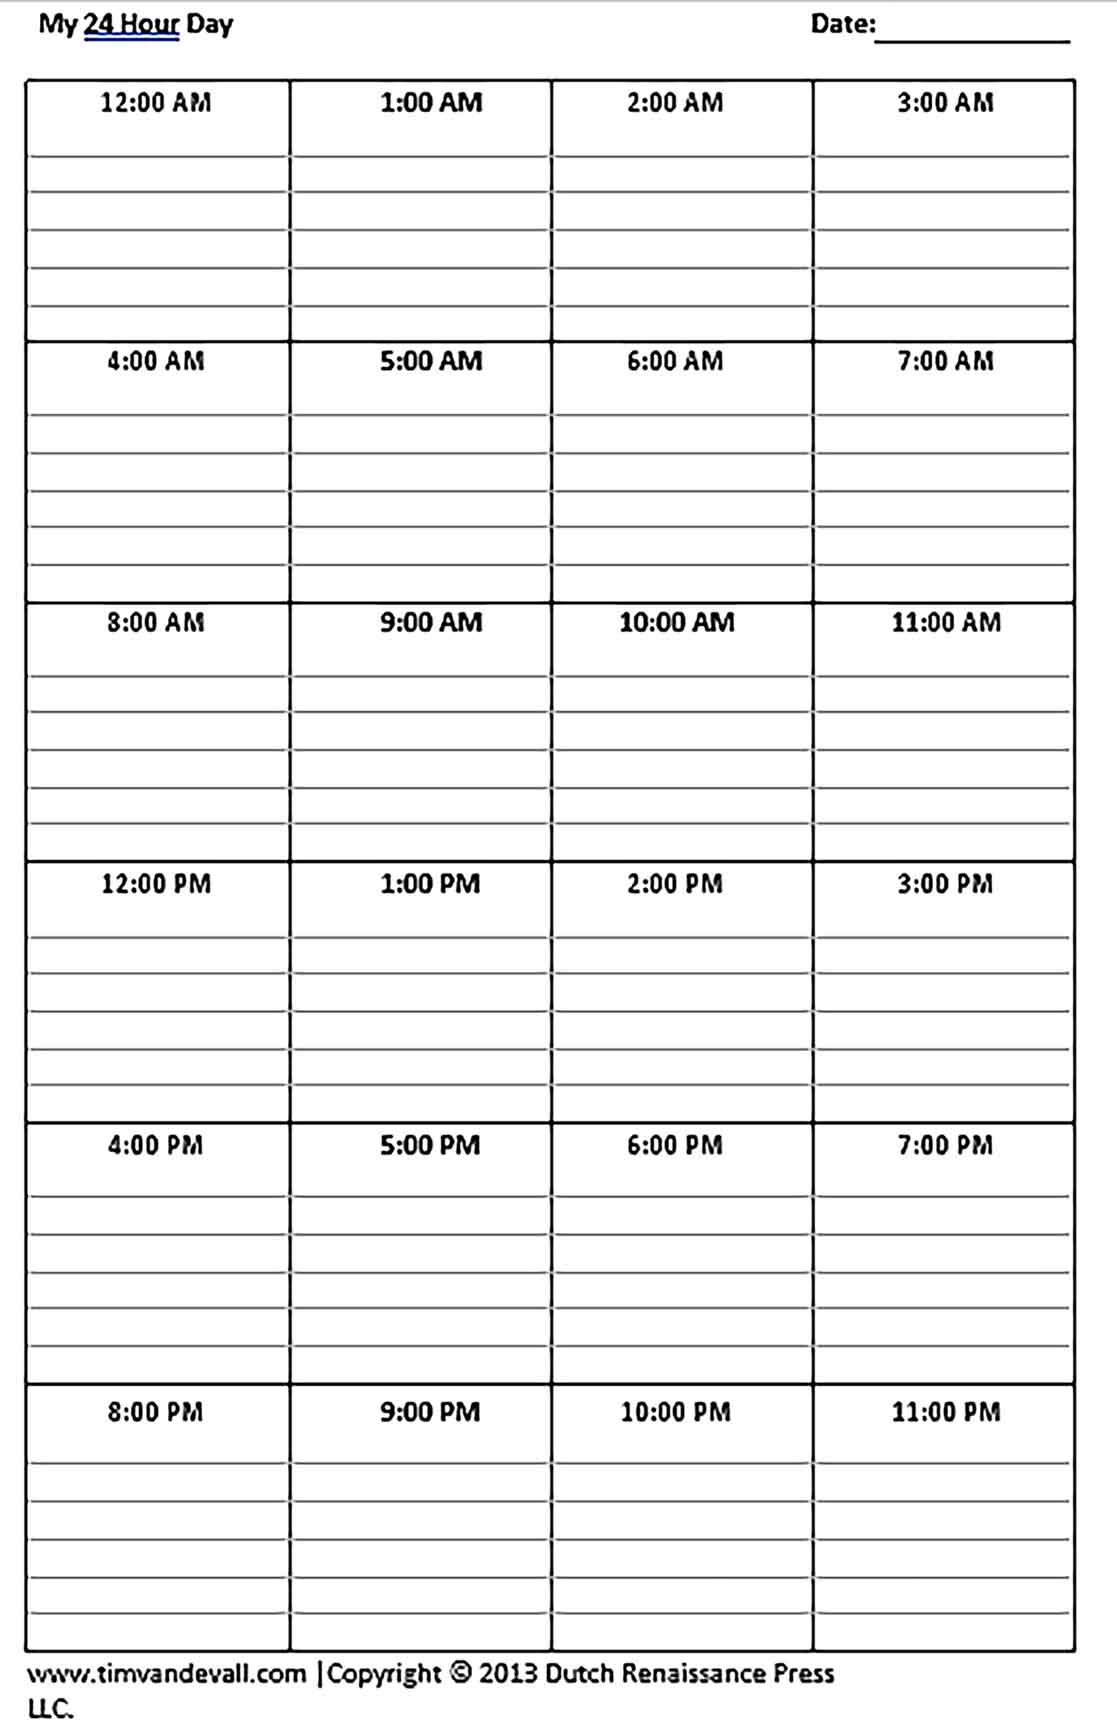 Template Daily Schedule in Sample Copy